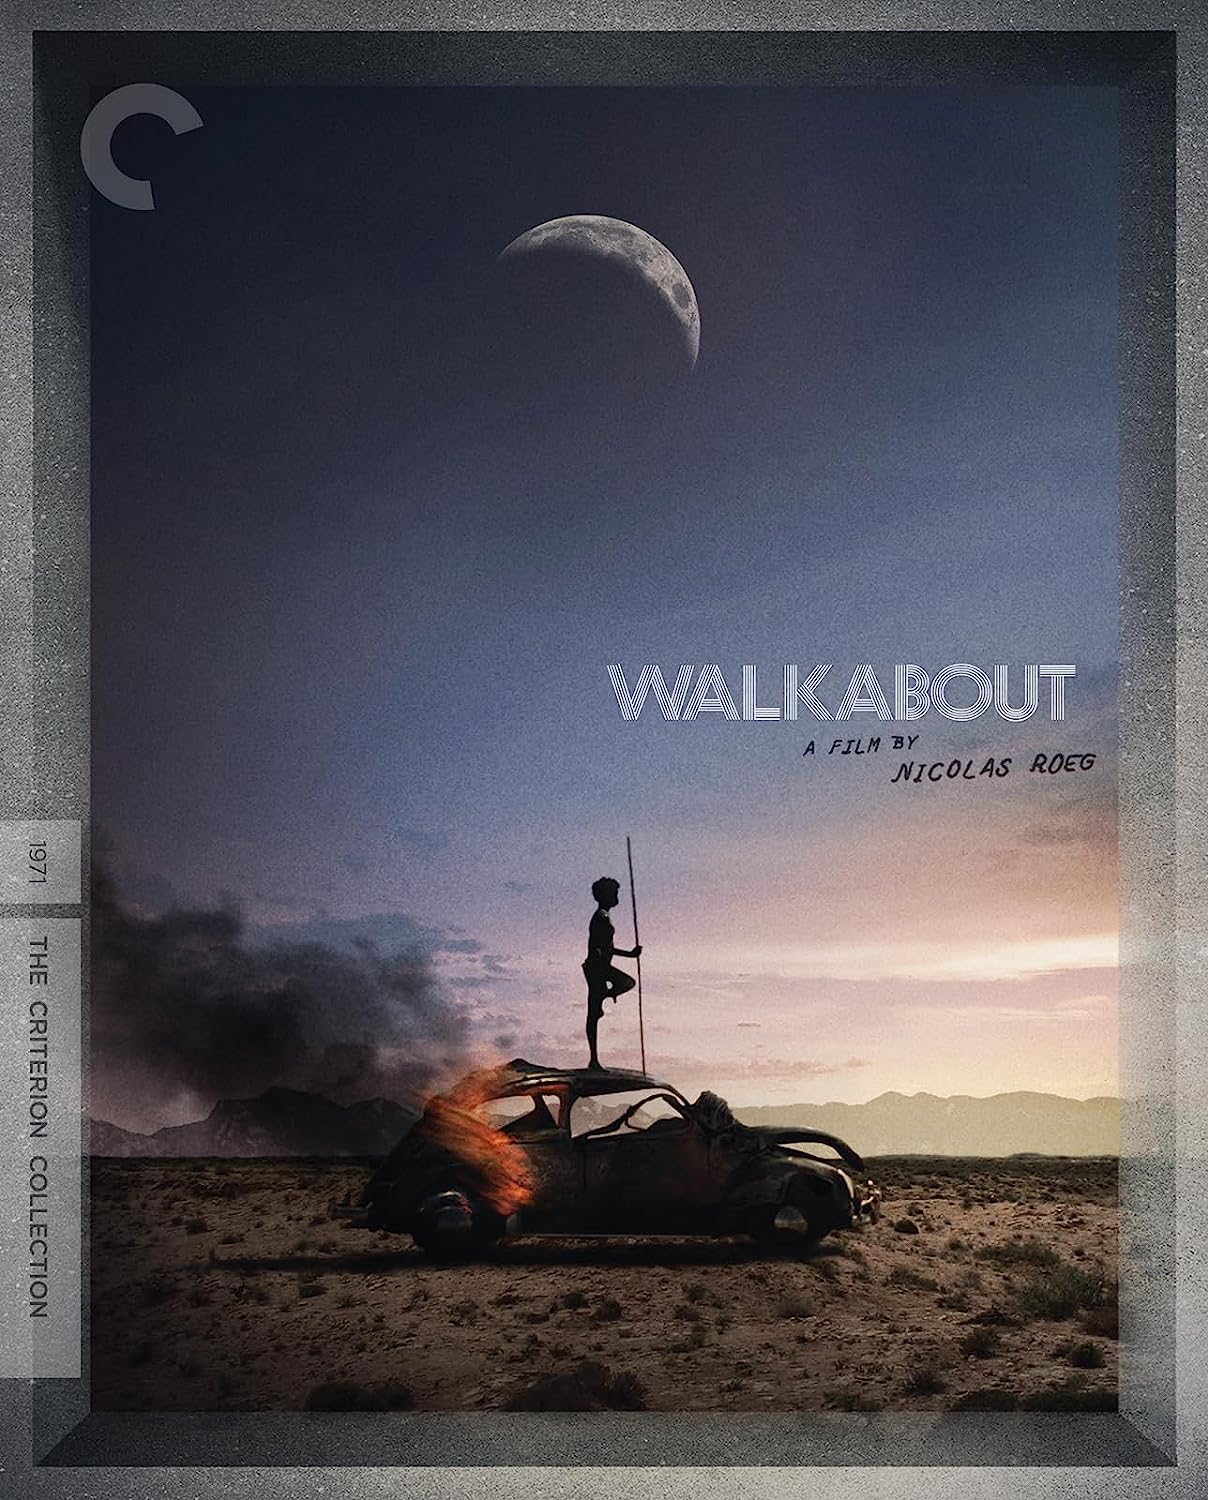 Walkabout 1971 4k Blu-ray Criterion Collection